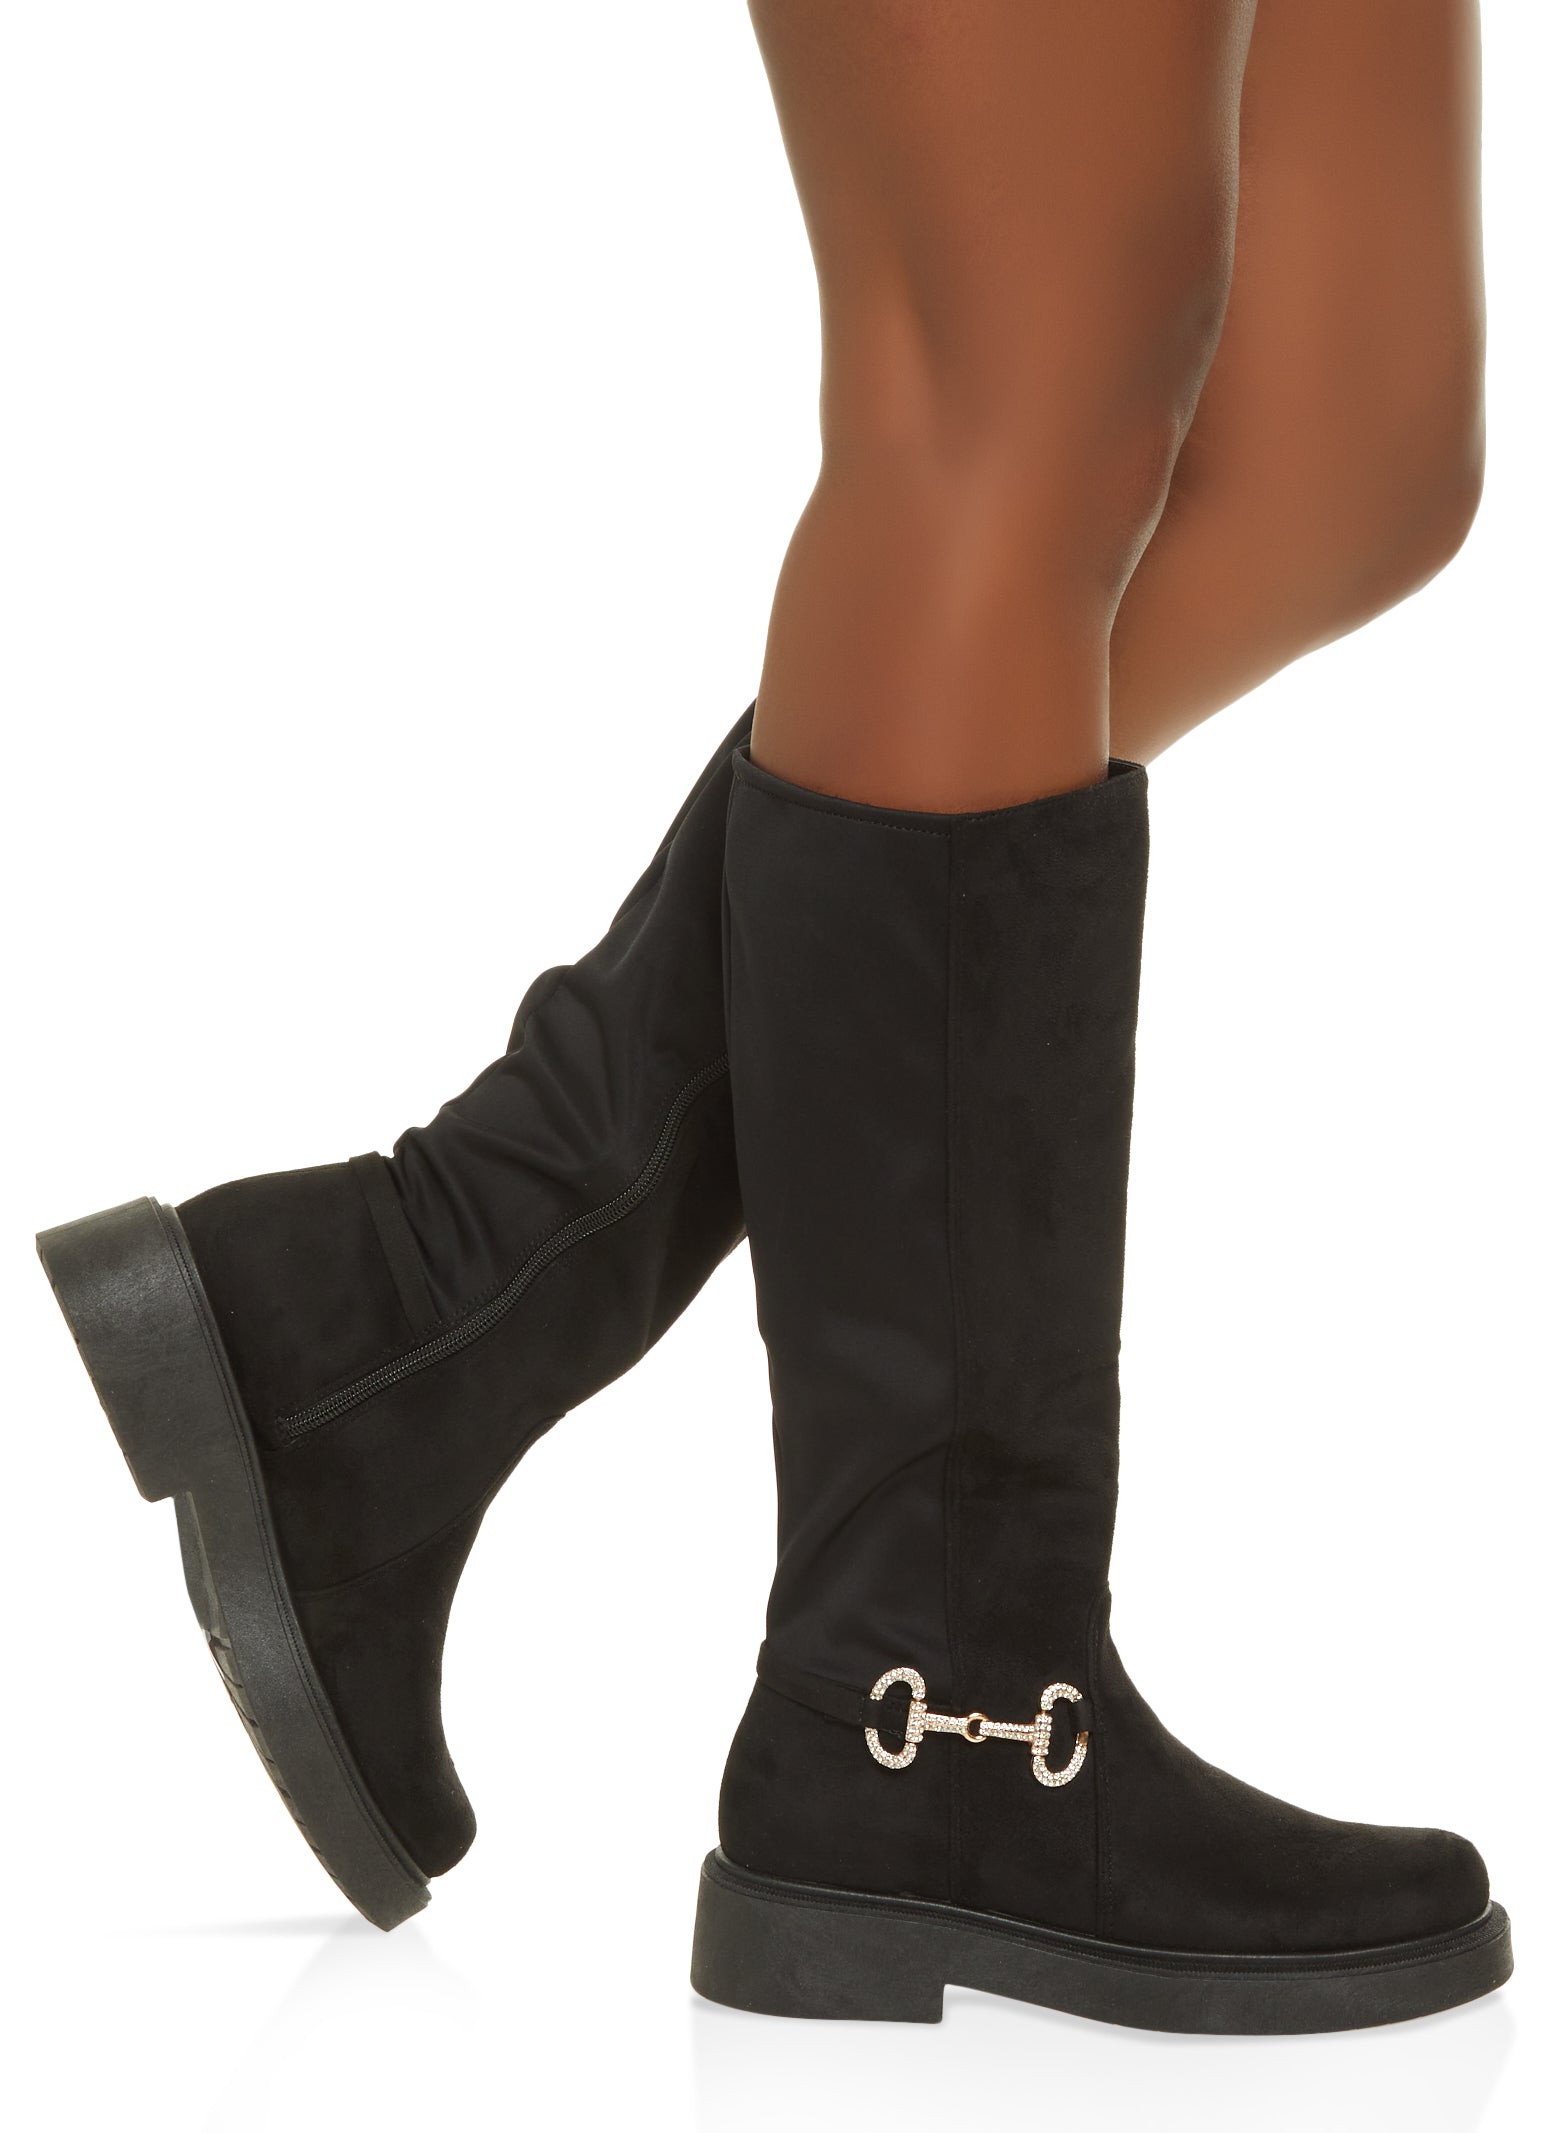 Gucci Black Suede Knee High Boots